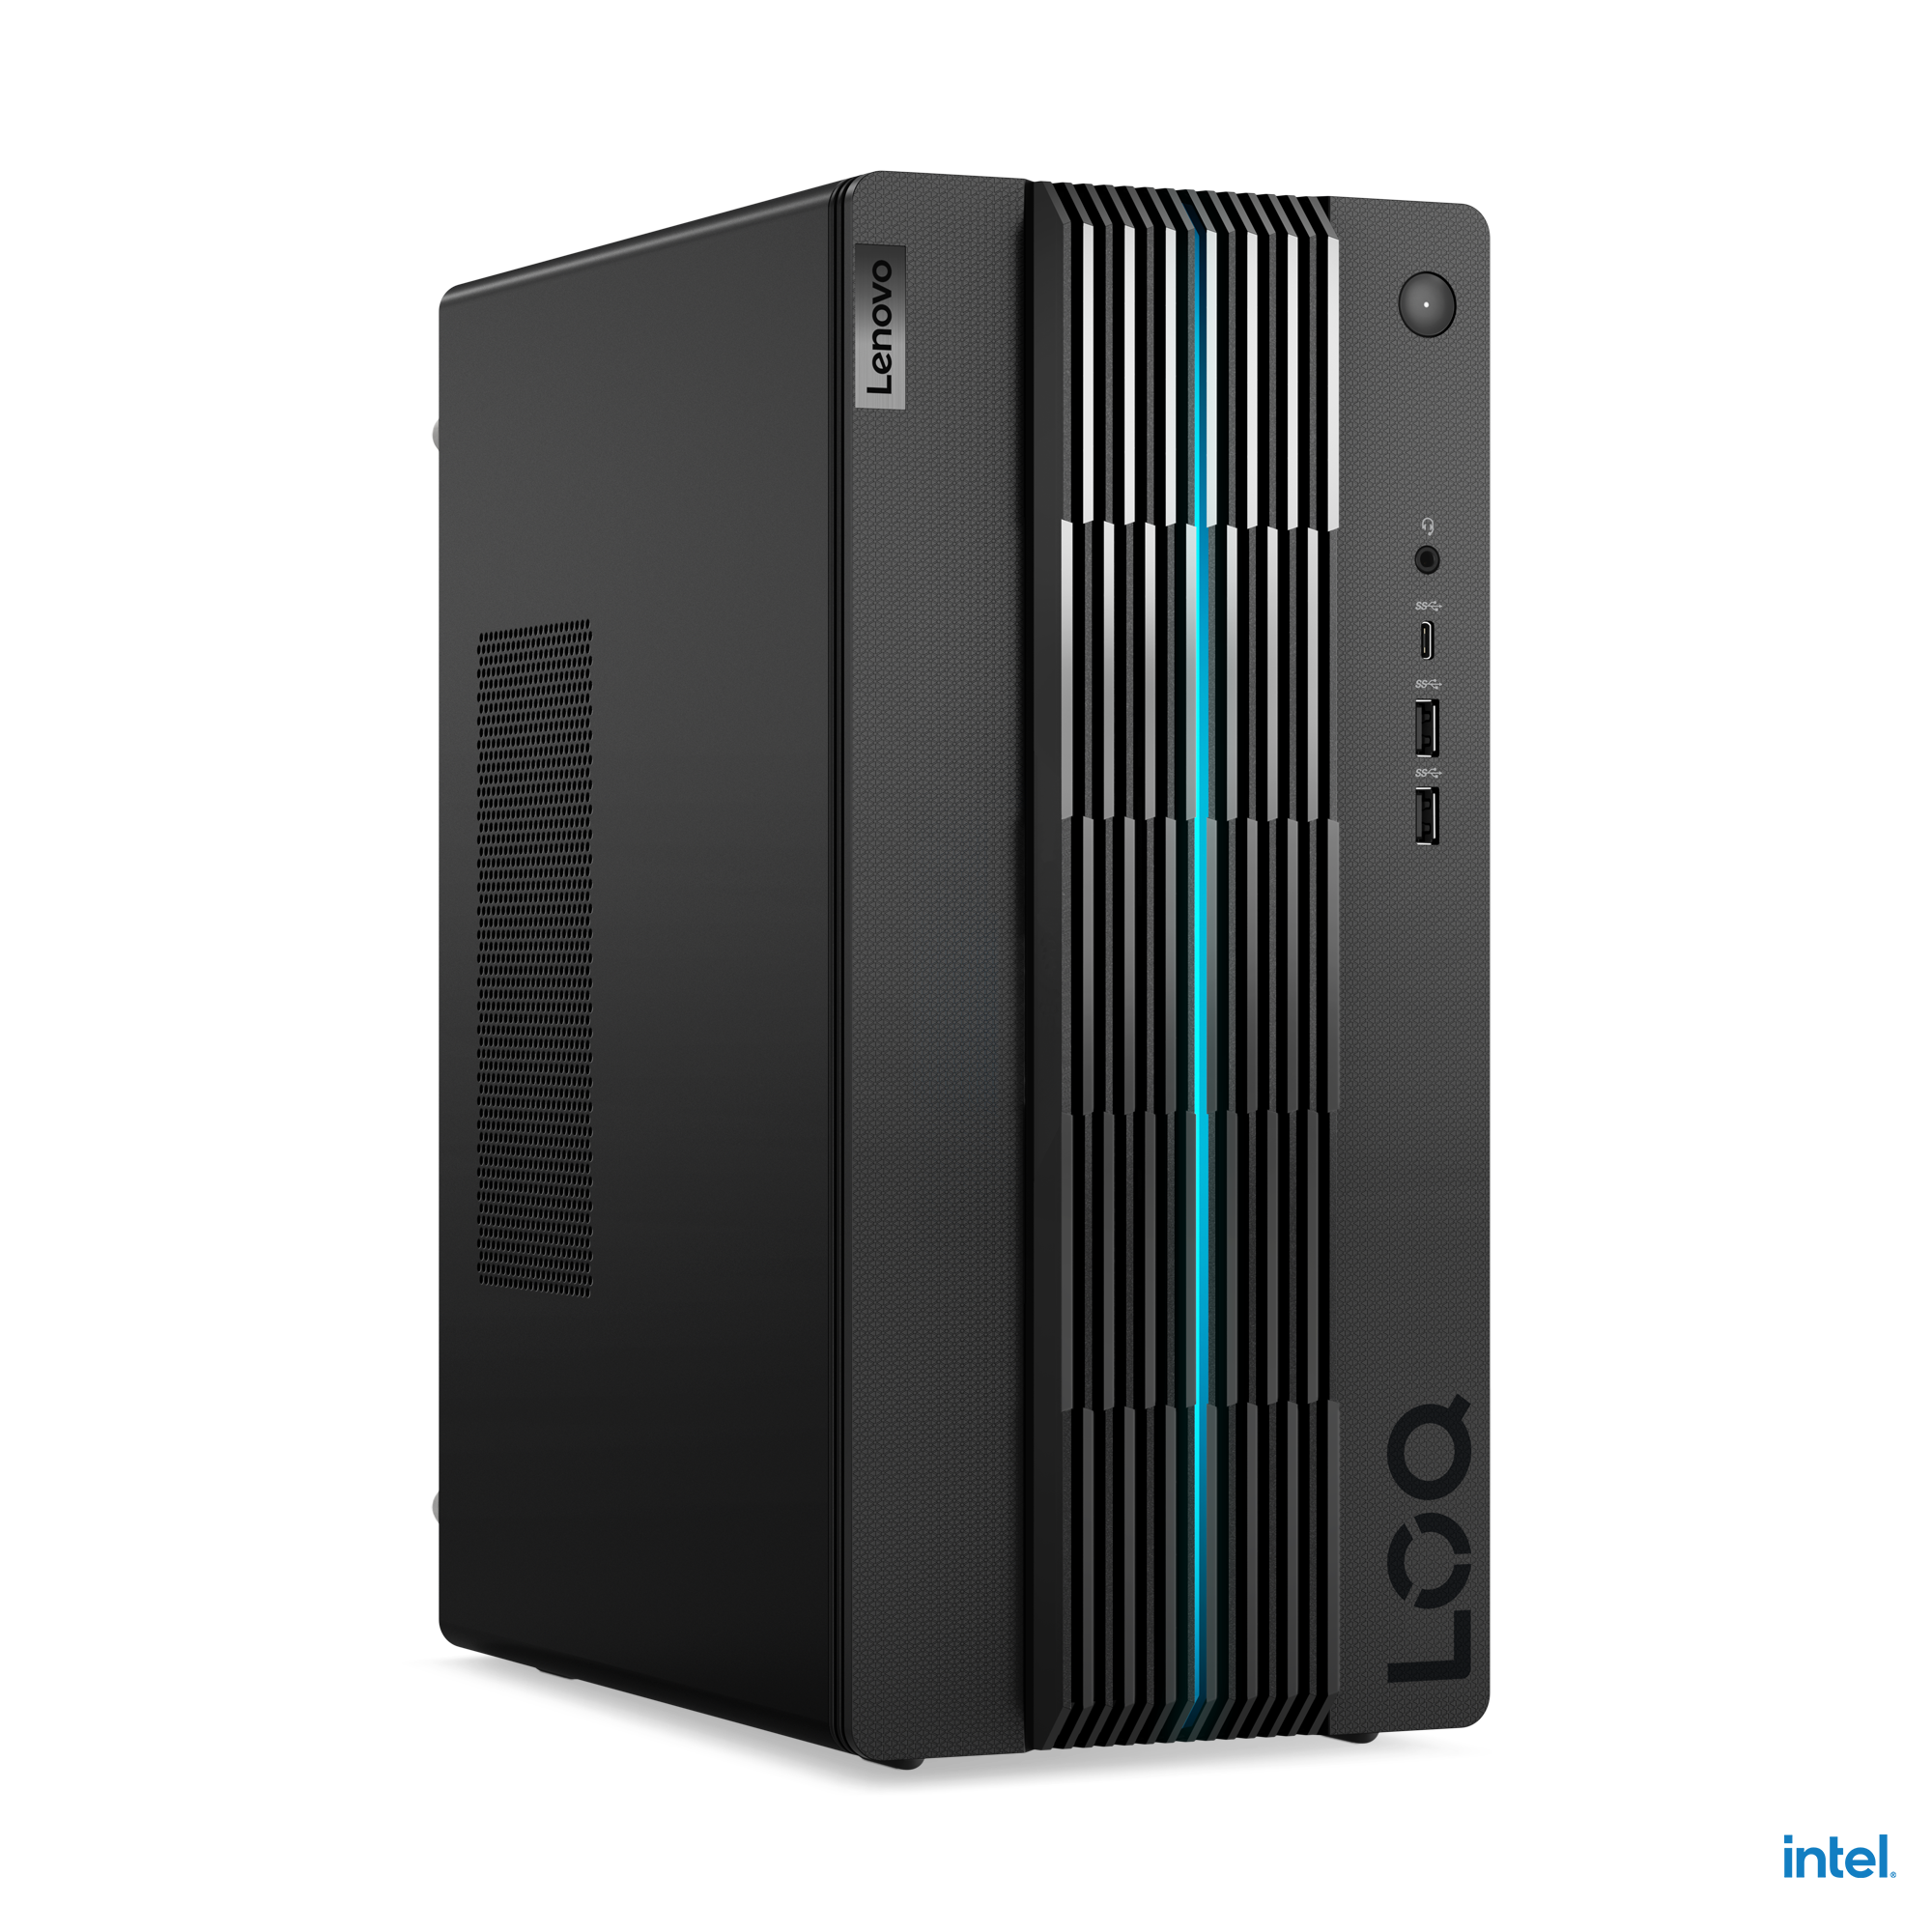 Front of the Lenovo LOQ Tower PC.